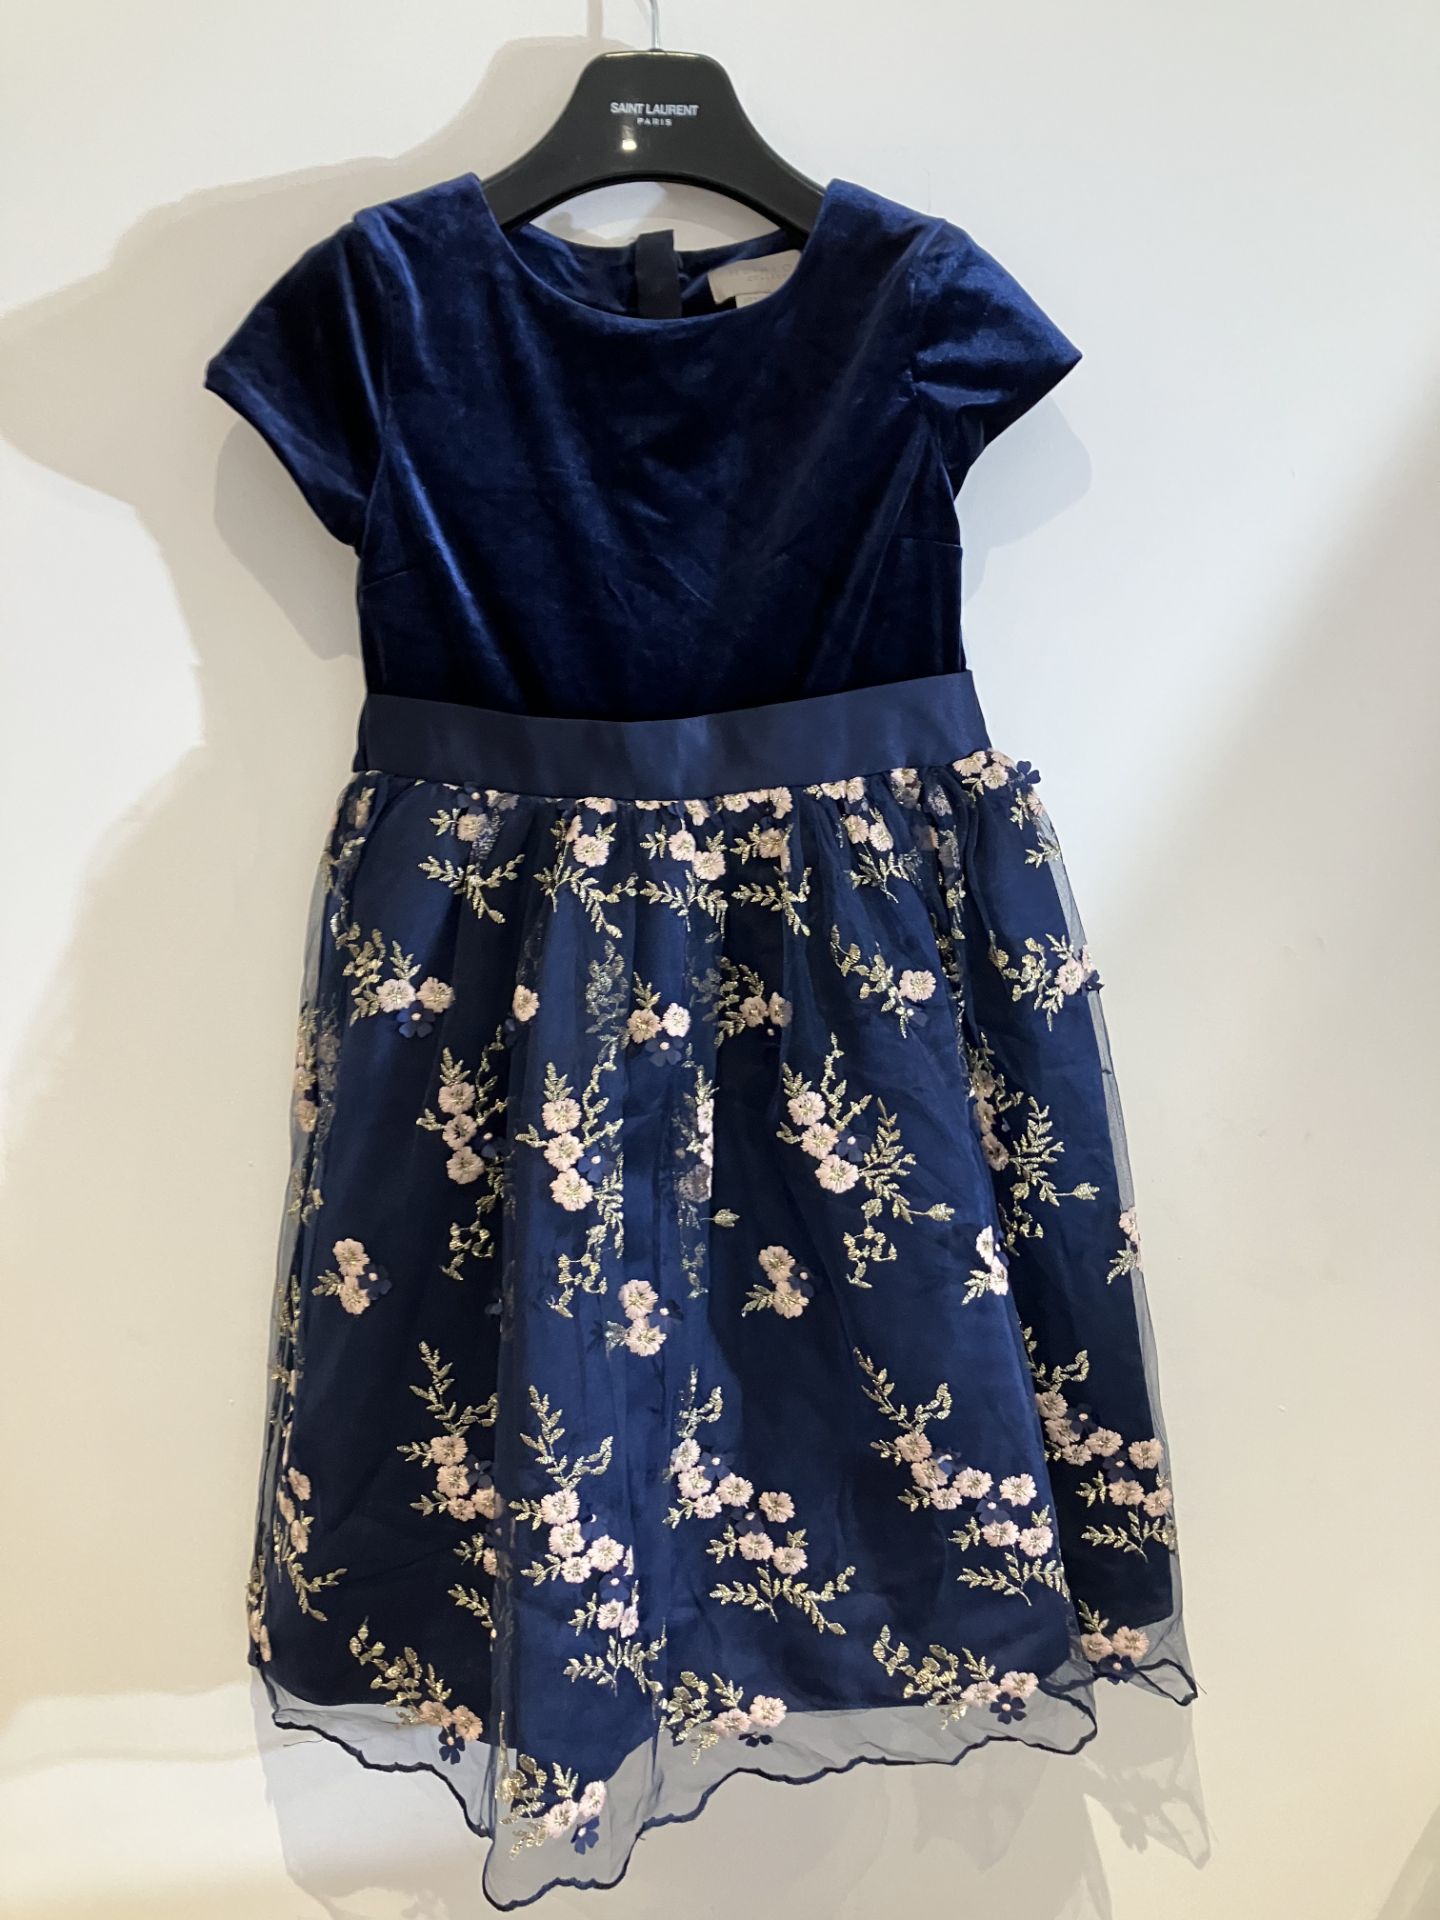 John Lewis Heir Loom Collection Dress Worn By A Body Double